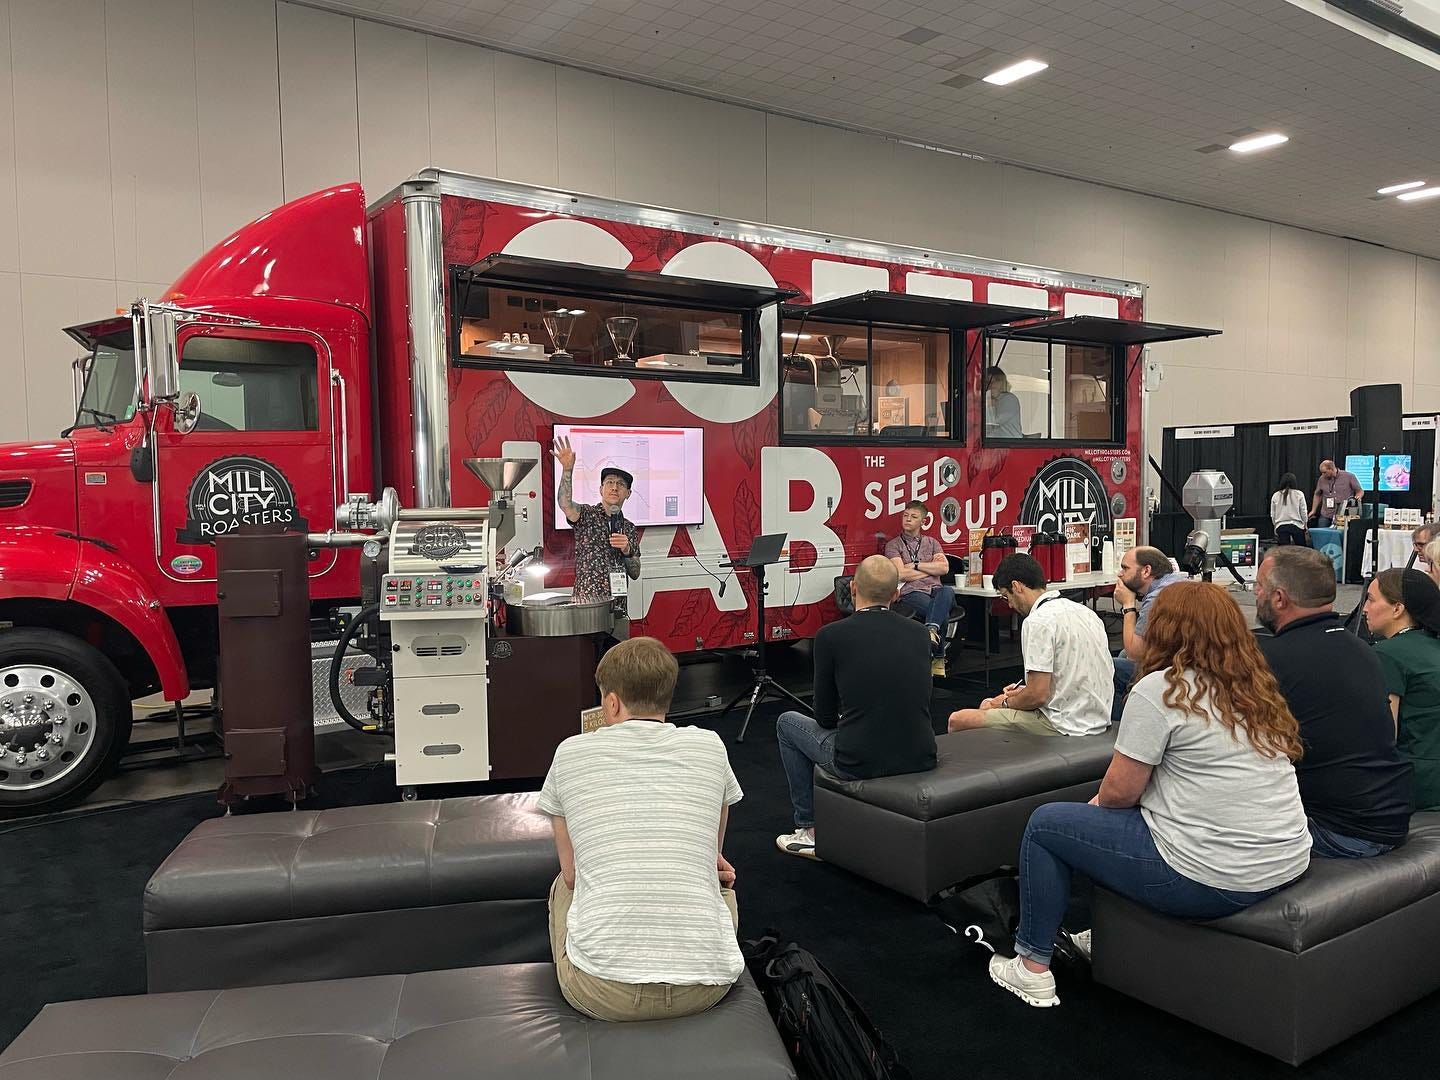 A man holding a mic gestures towards the ceiling while standing next to a coffee roaster in front of a bright red box truck semi that has windows cut into the side to expose the coffee brewing machines inside. An audience sitting on grey cushioned benches takes notes with their back to the camera.